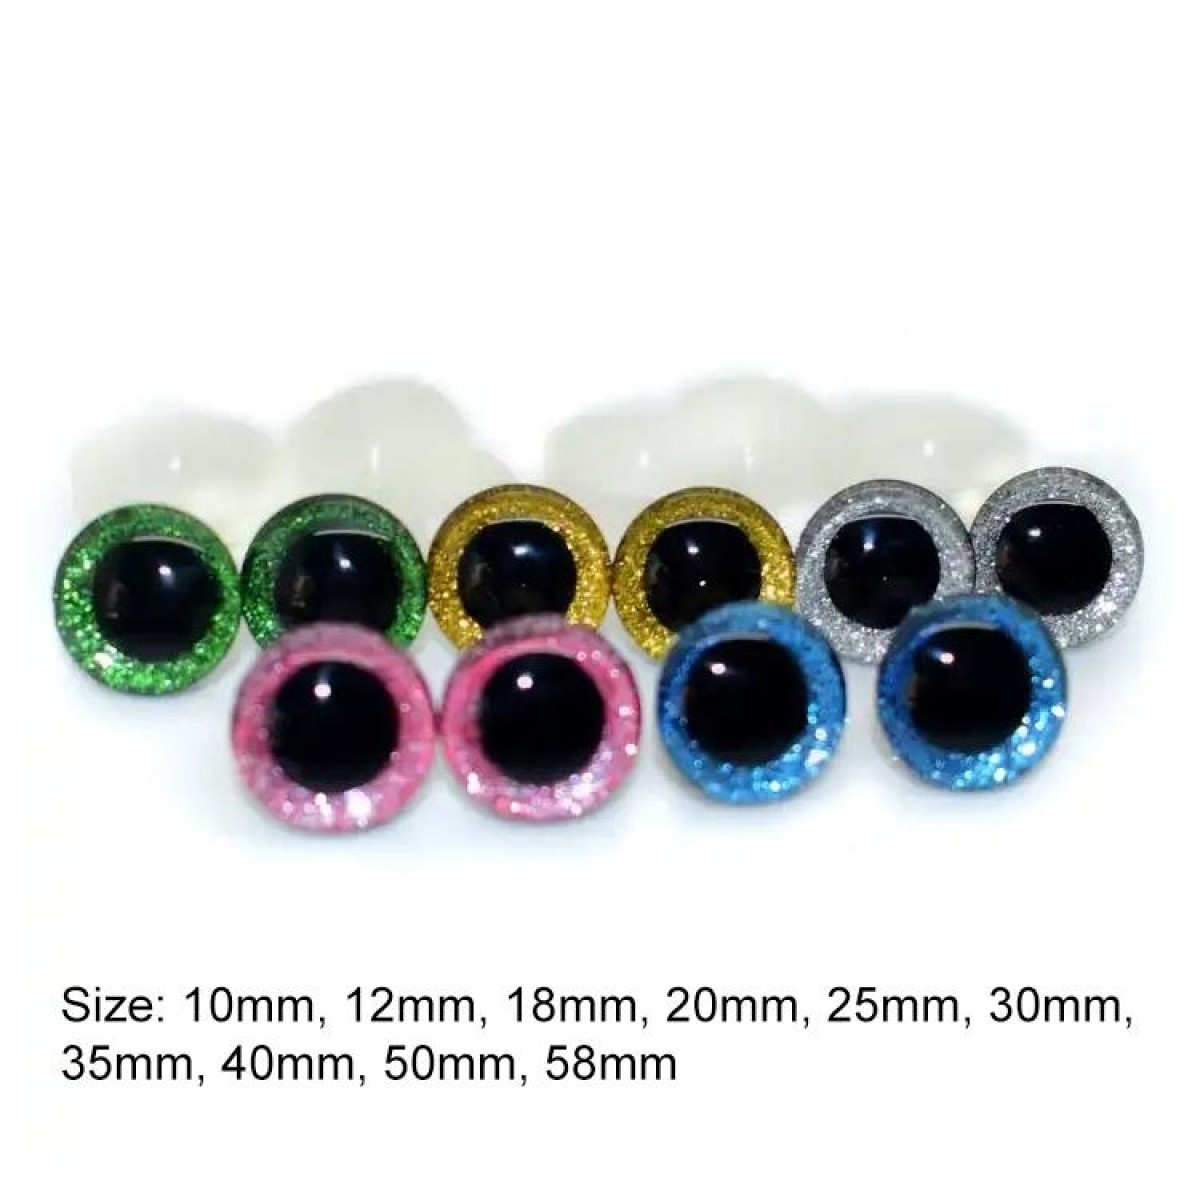 100pcs Resin Three-dimensional Animal Artificial Eye Plastic Plush Toy Accessories, Size:16mm(Colors Shipped Randomly)